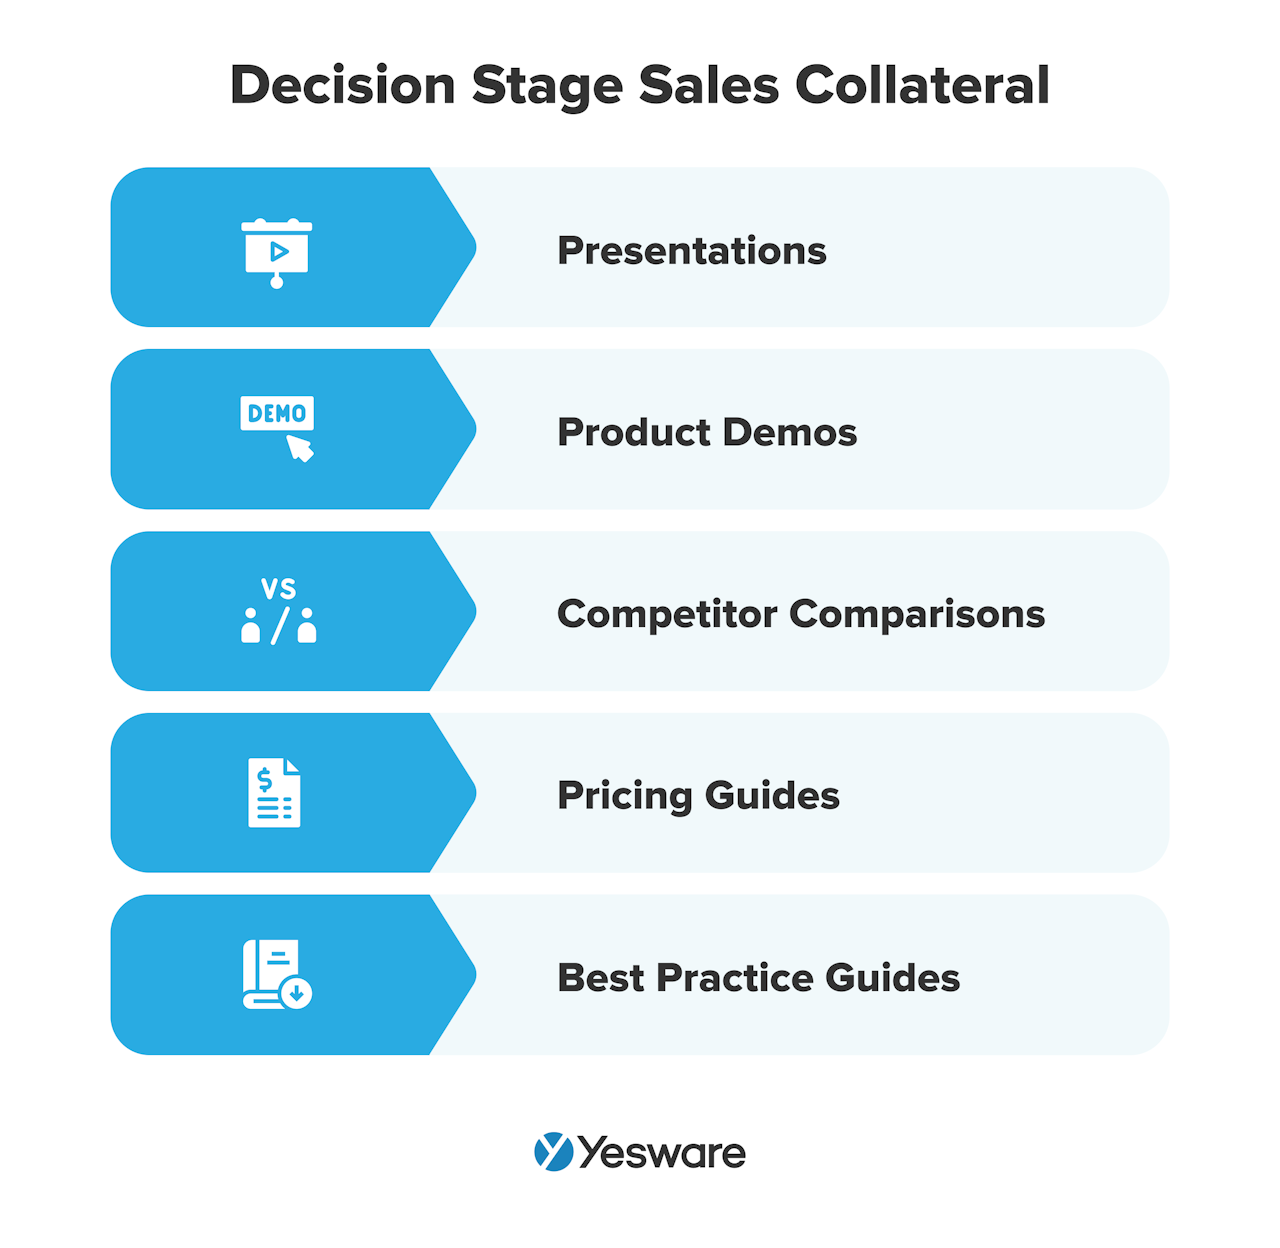 sales collateral: decision stage sales collateral